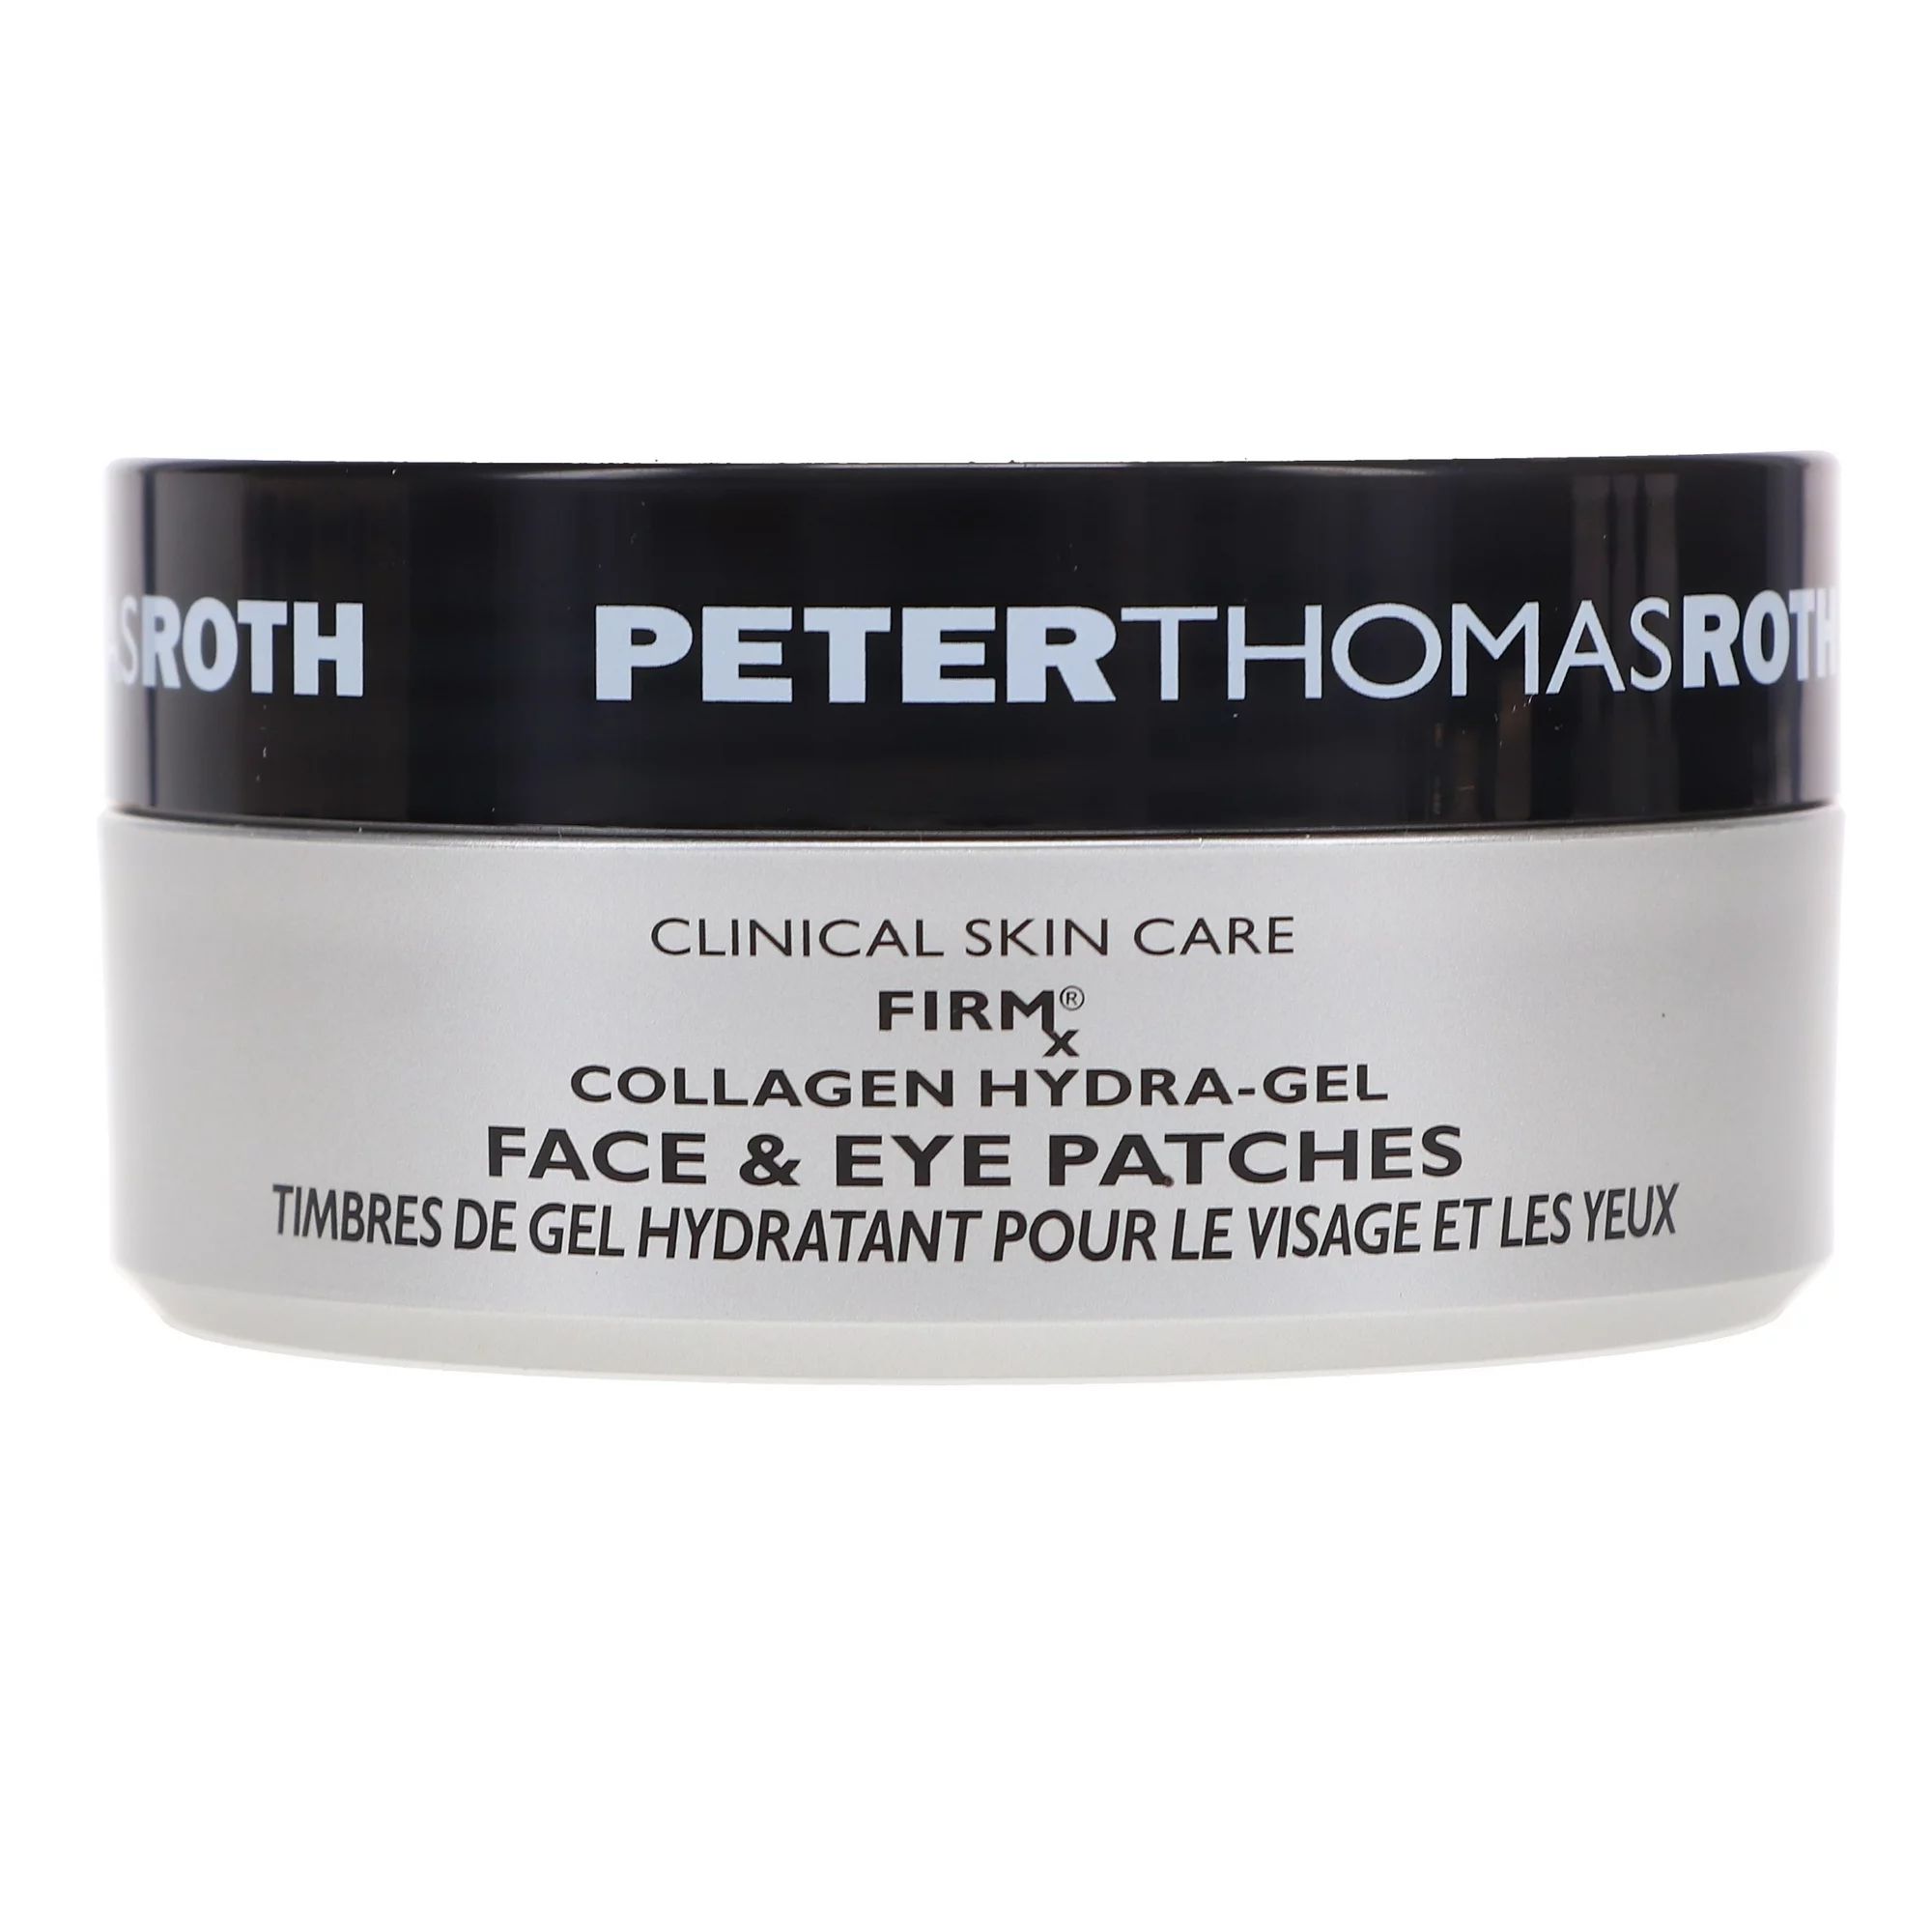 Peter Thomas Roth FIRMx Collagen Face & Eye Hydra-Gel Patches 90 ct | Walmart (US)